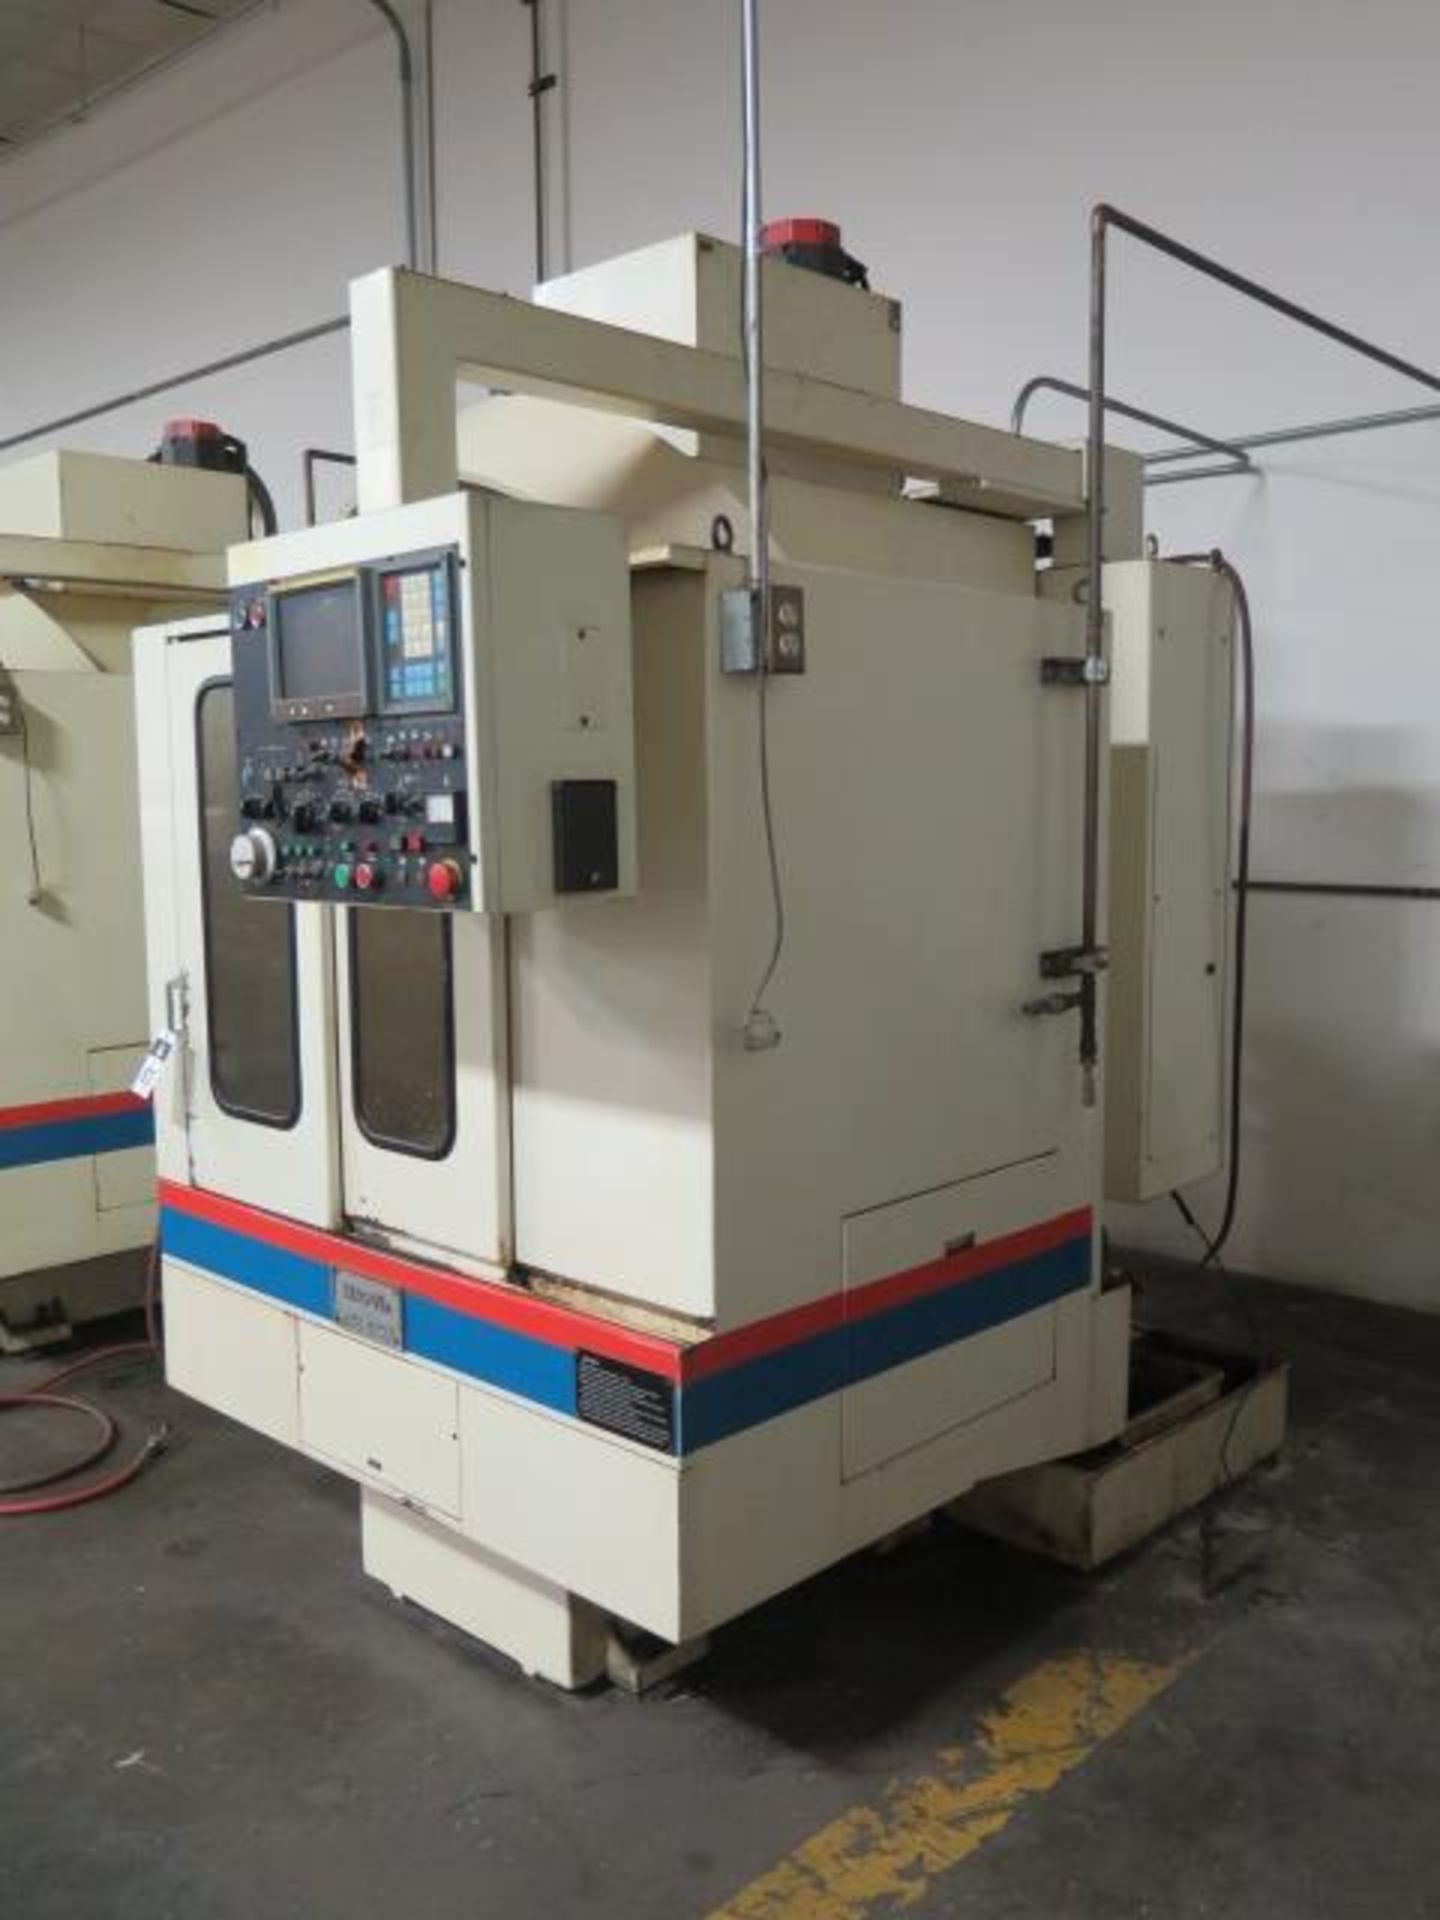 Takisawa MAC-V1E CNC Drilling/Tapping Center s/n TMYP8181 (X AXIS MOTOR MAKING NOISE), SOLD AS IS - Image 3 of 19